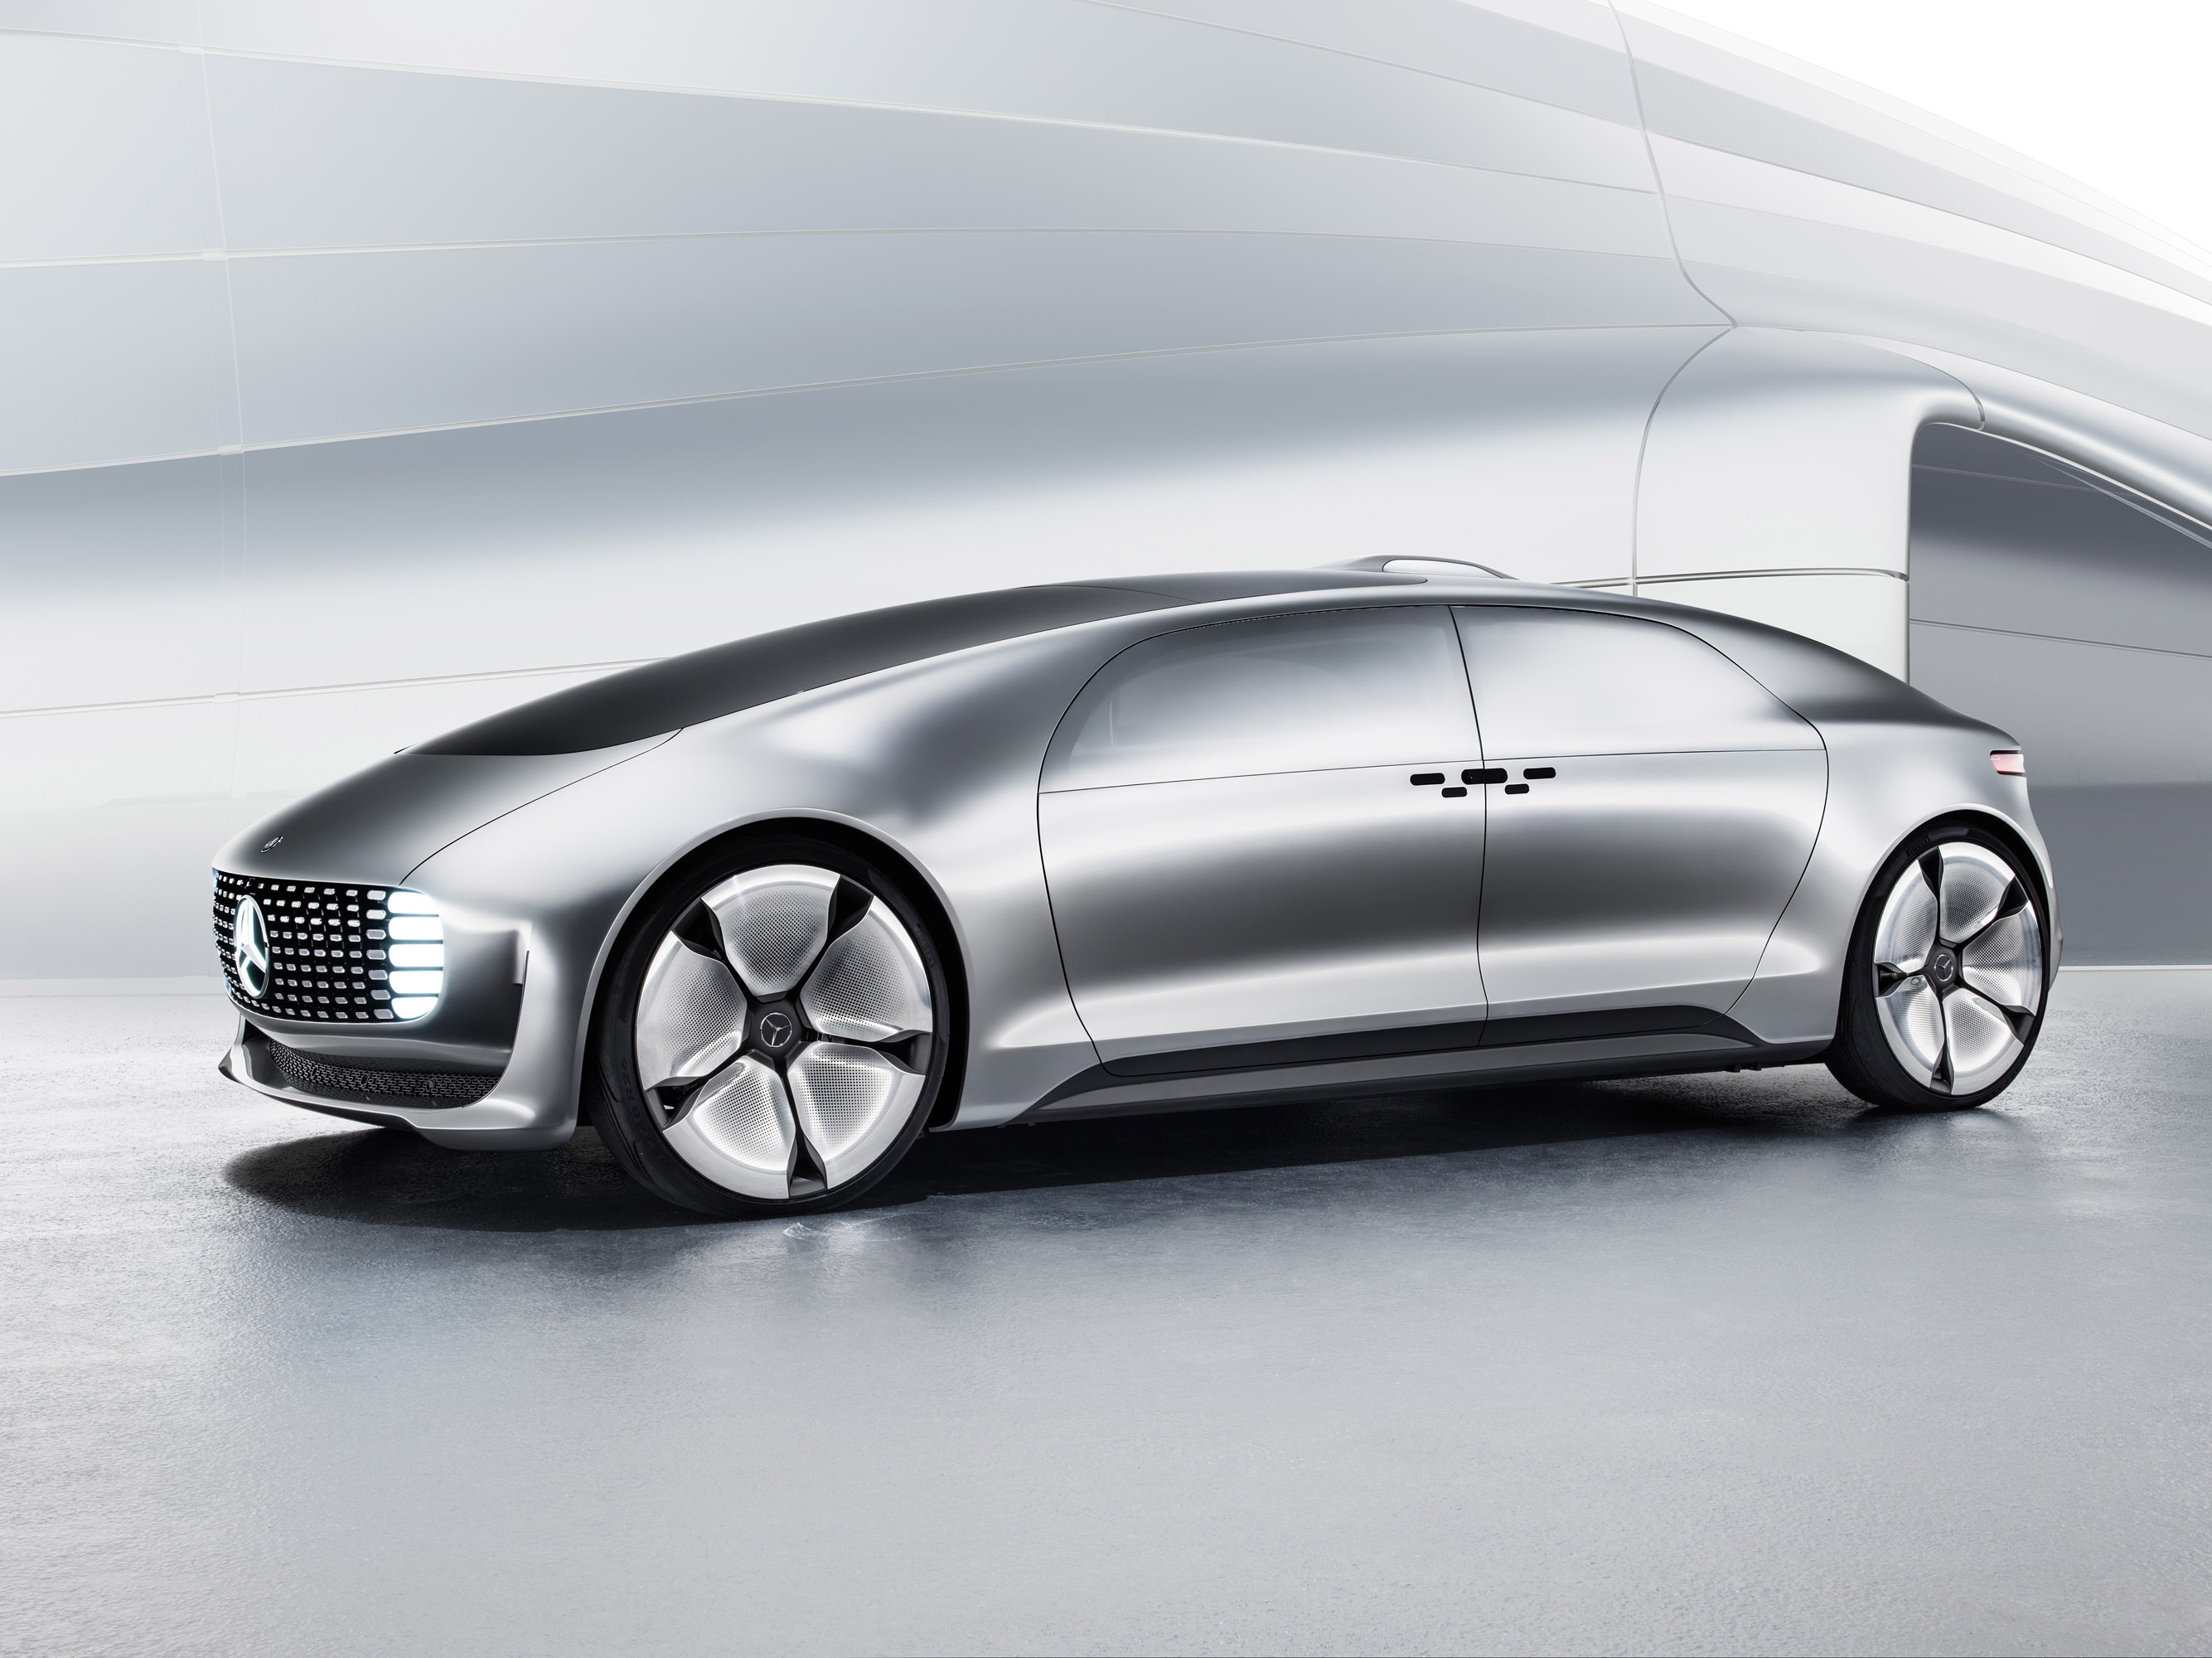 Mercedes Benz F 015 Luxury in Motion concept